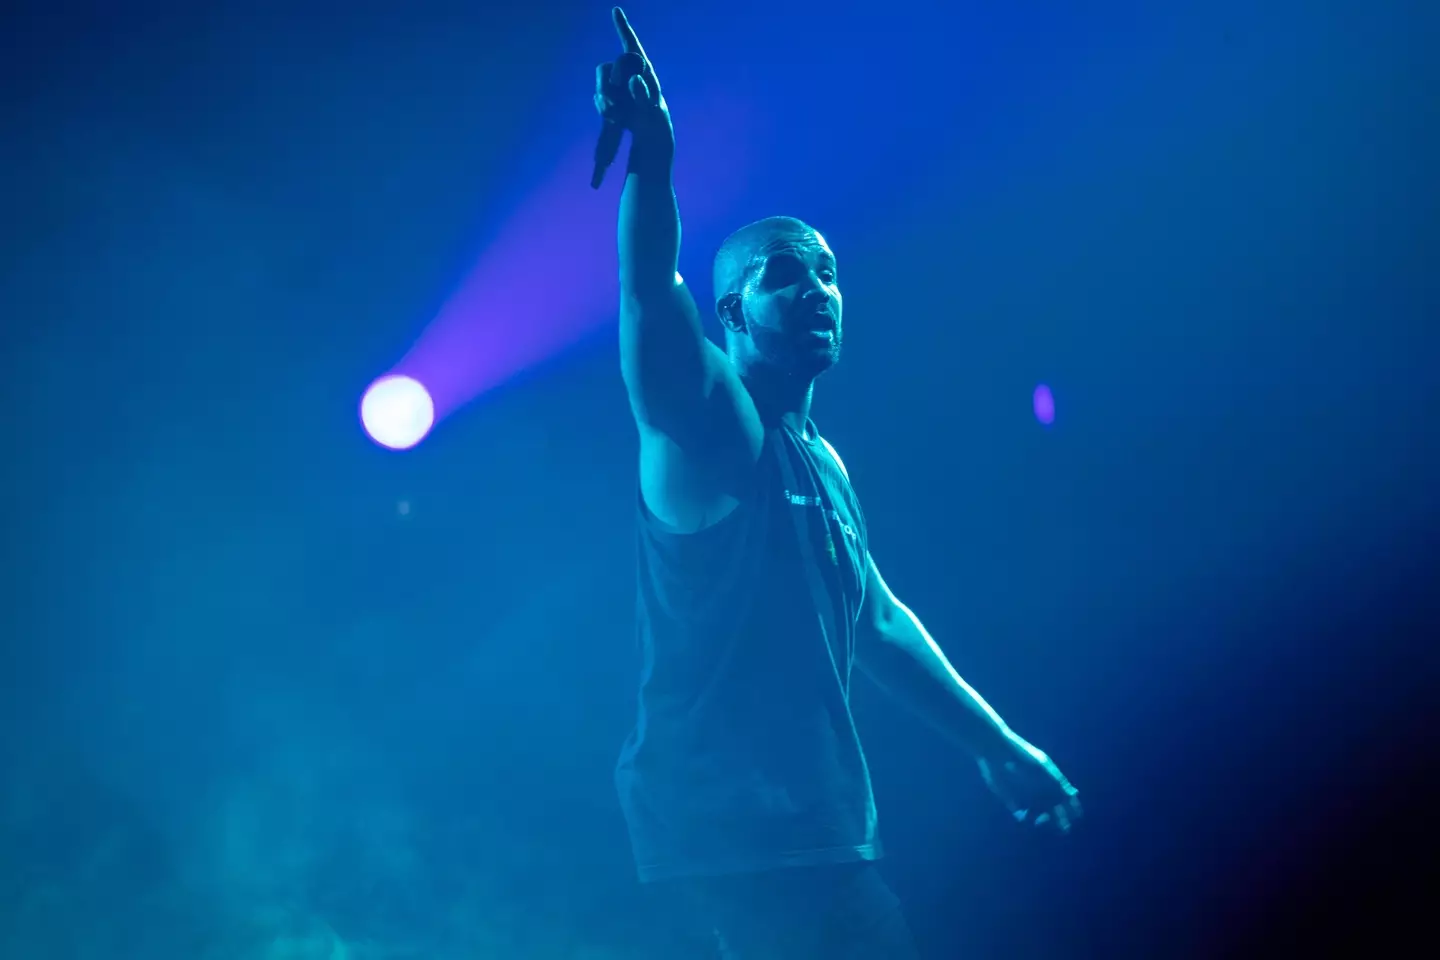 Drake has reflected on mentioning his exes in his songs.